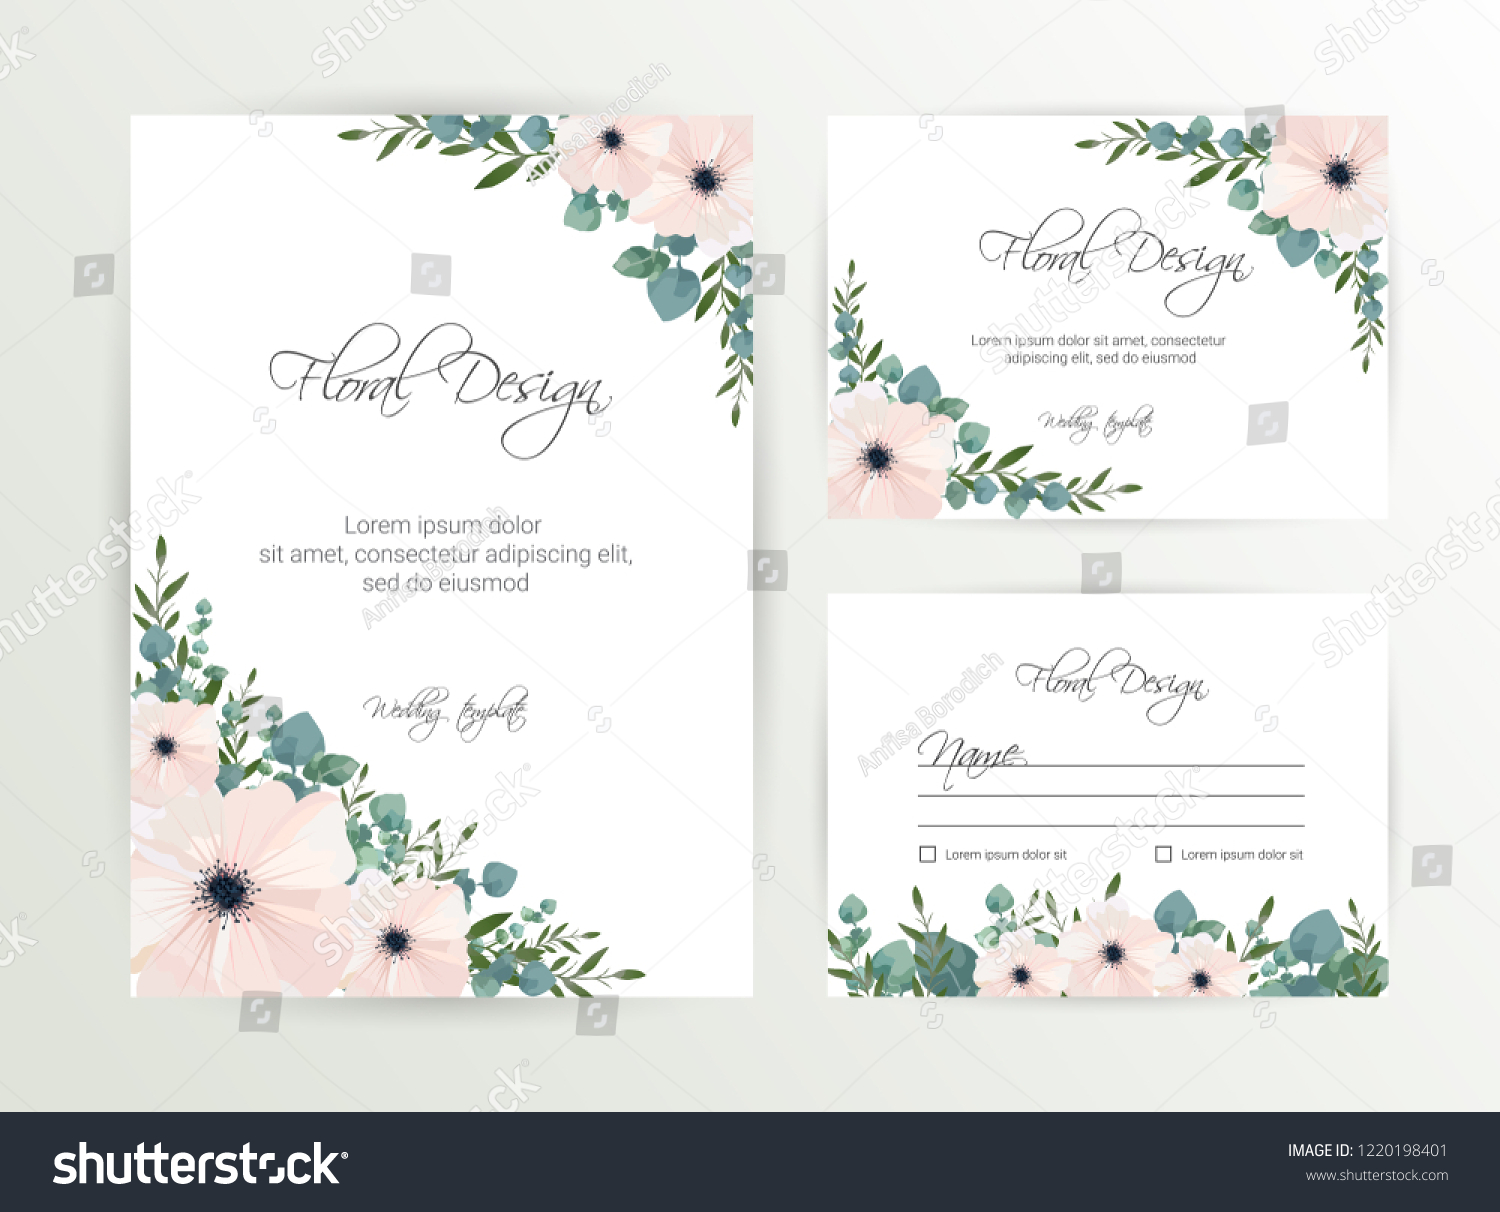 Banner on flower background. Wedding Invitation, modern card Design. Save the Date Card Templates Set with Greenery, Decorative Floral and Herbs Element. Vintage Botanical. eps 10 #1220198401